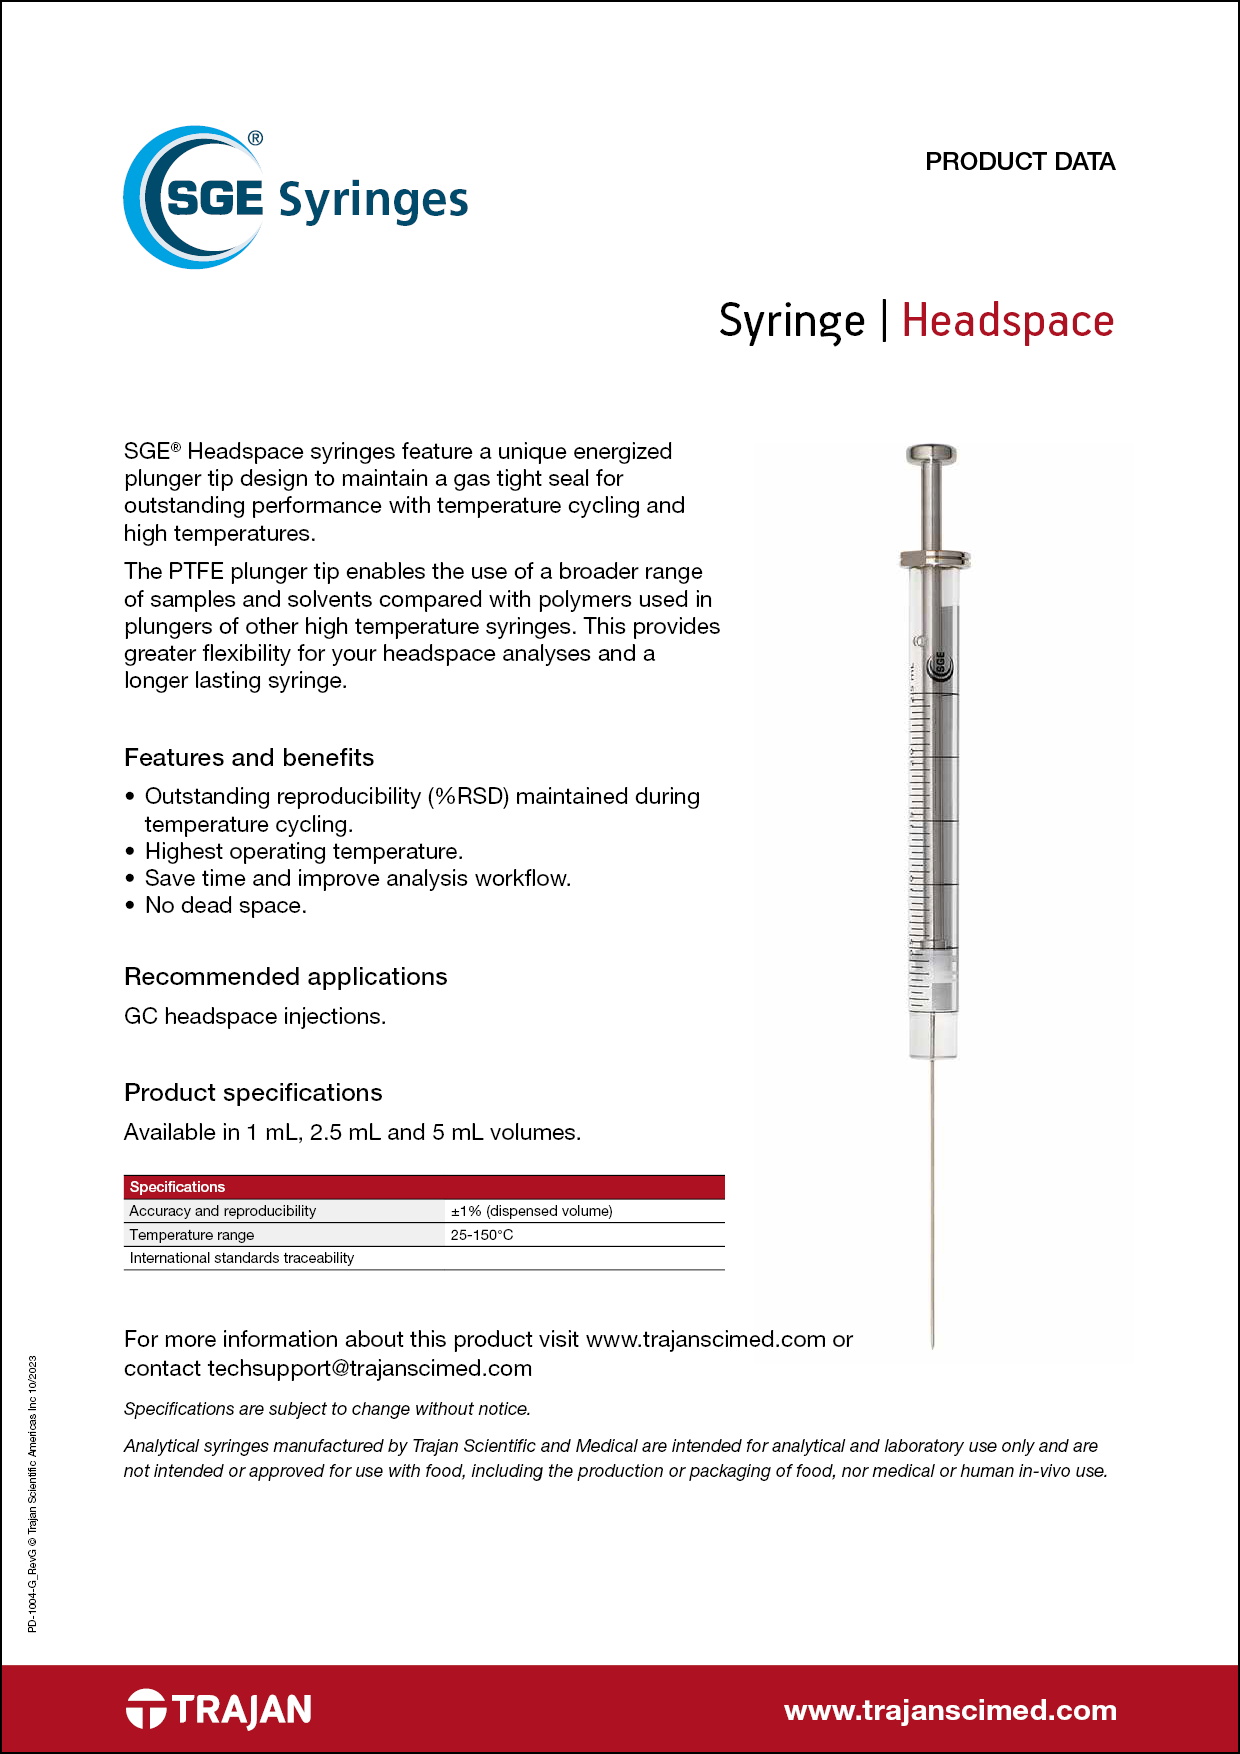 Product Data Sheet - SGE headspace syringes